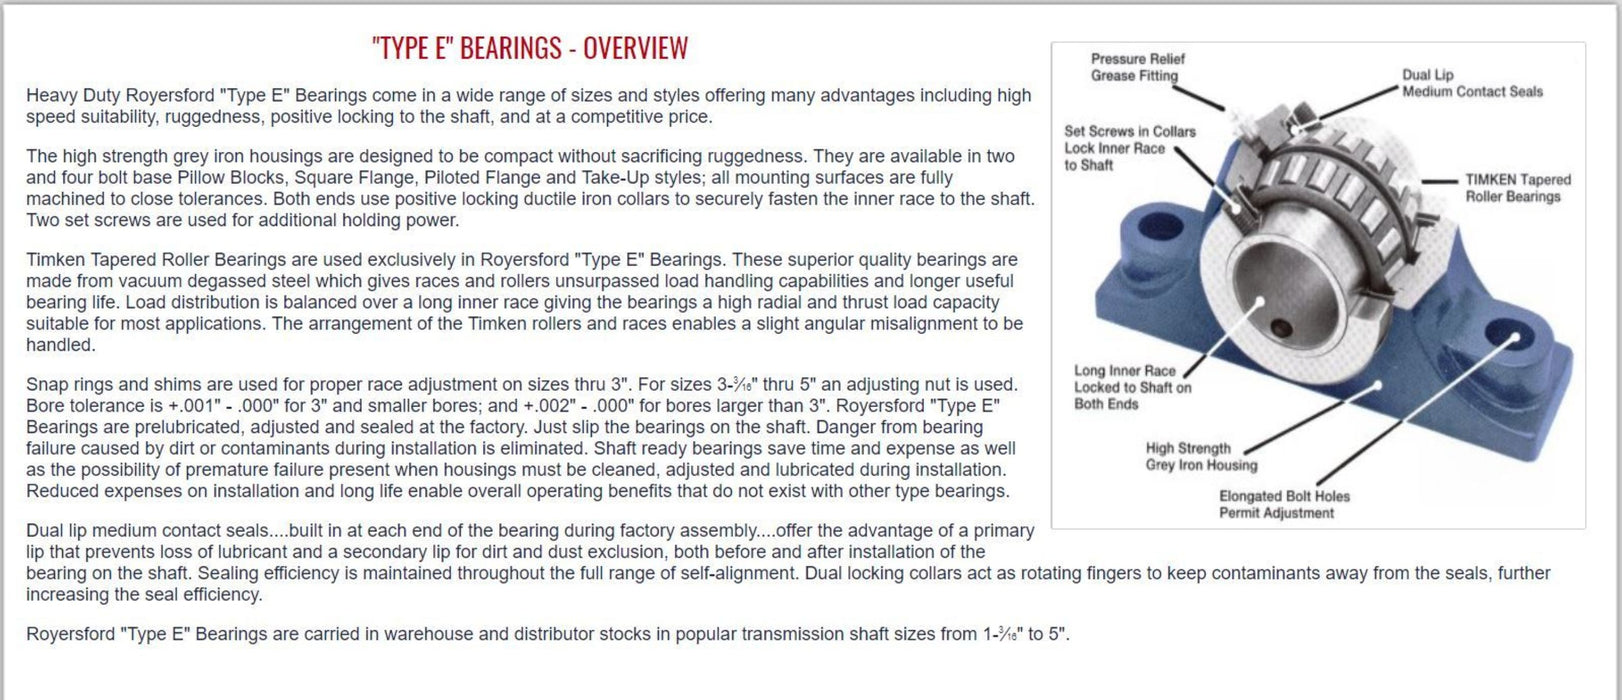 20-05-0103, Royersford Type E 4 Bolt Square Flange Bearing, 1-3/16" with Timken Tapered Roller Bearings